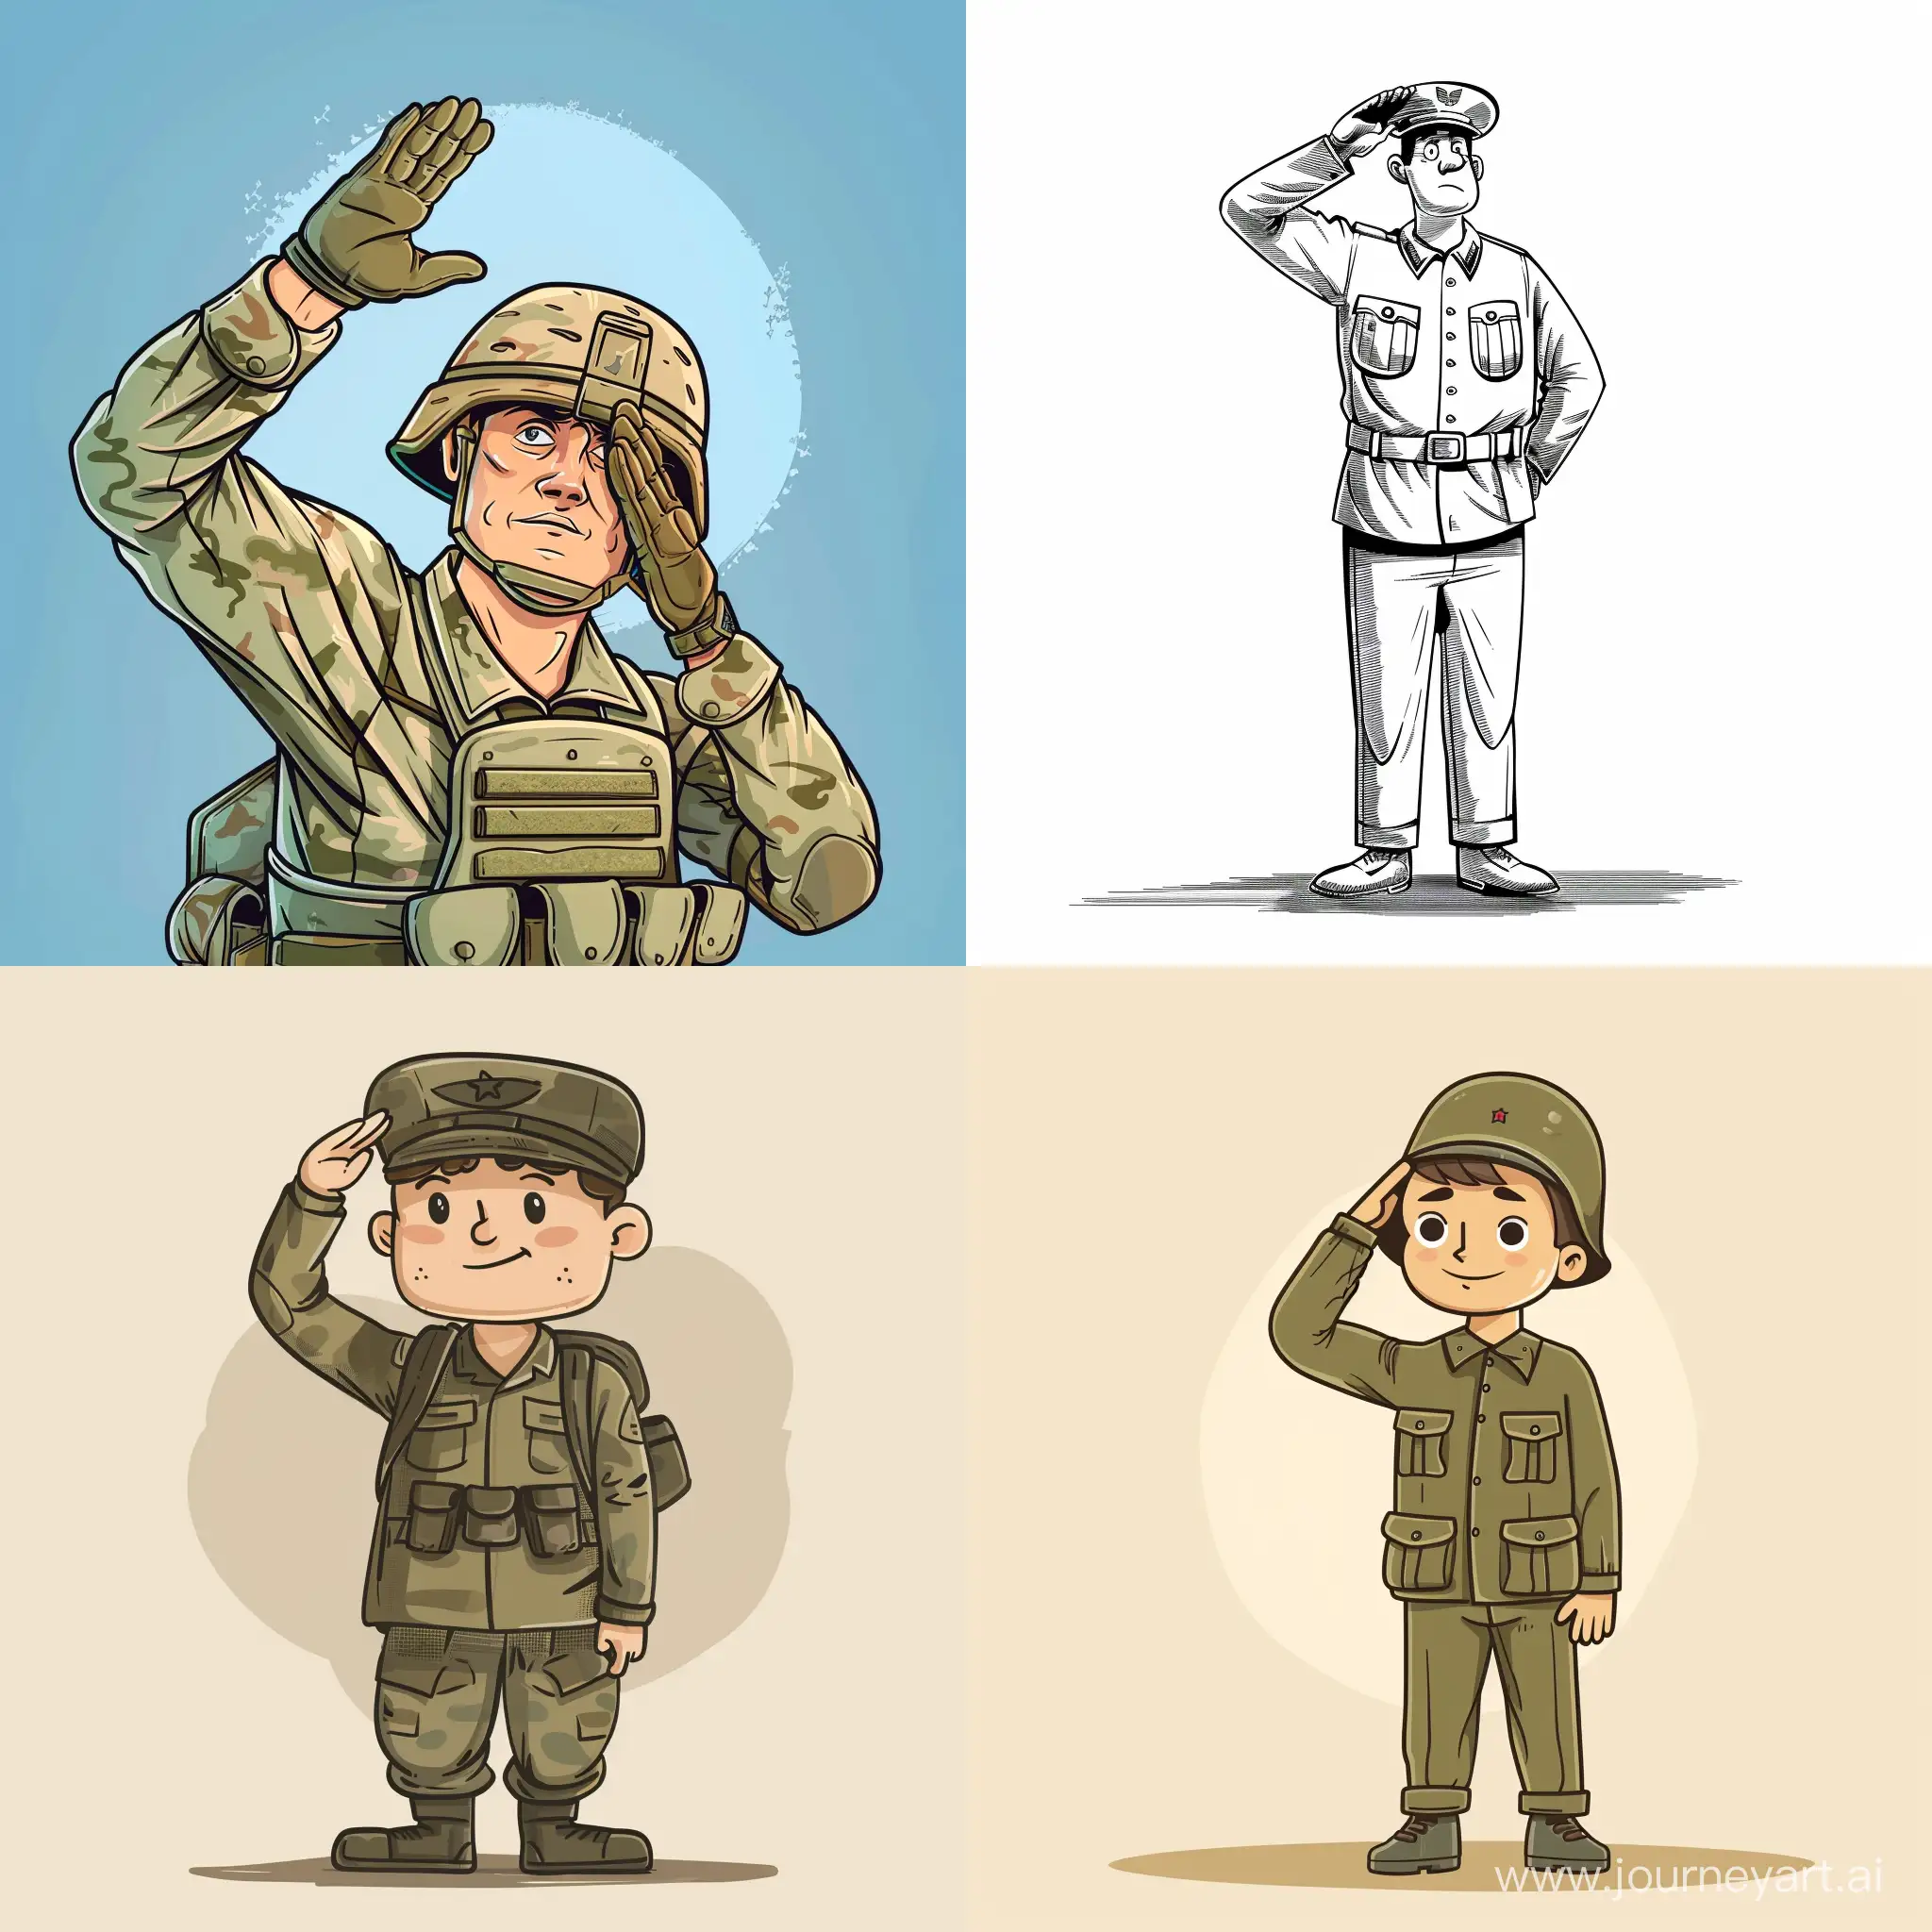 Cheerful-Cartoon-Soldier-Saluting-with-a-Comedic-Twist